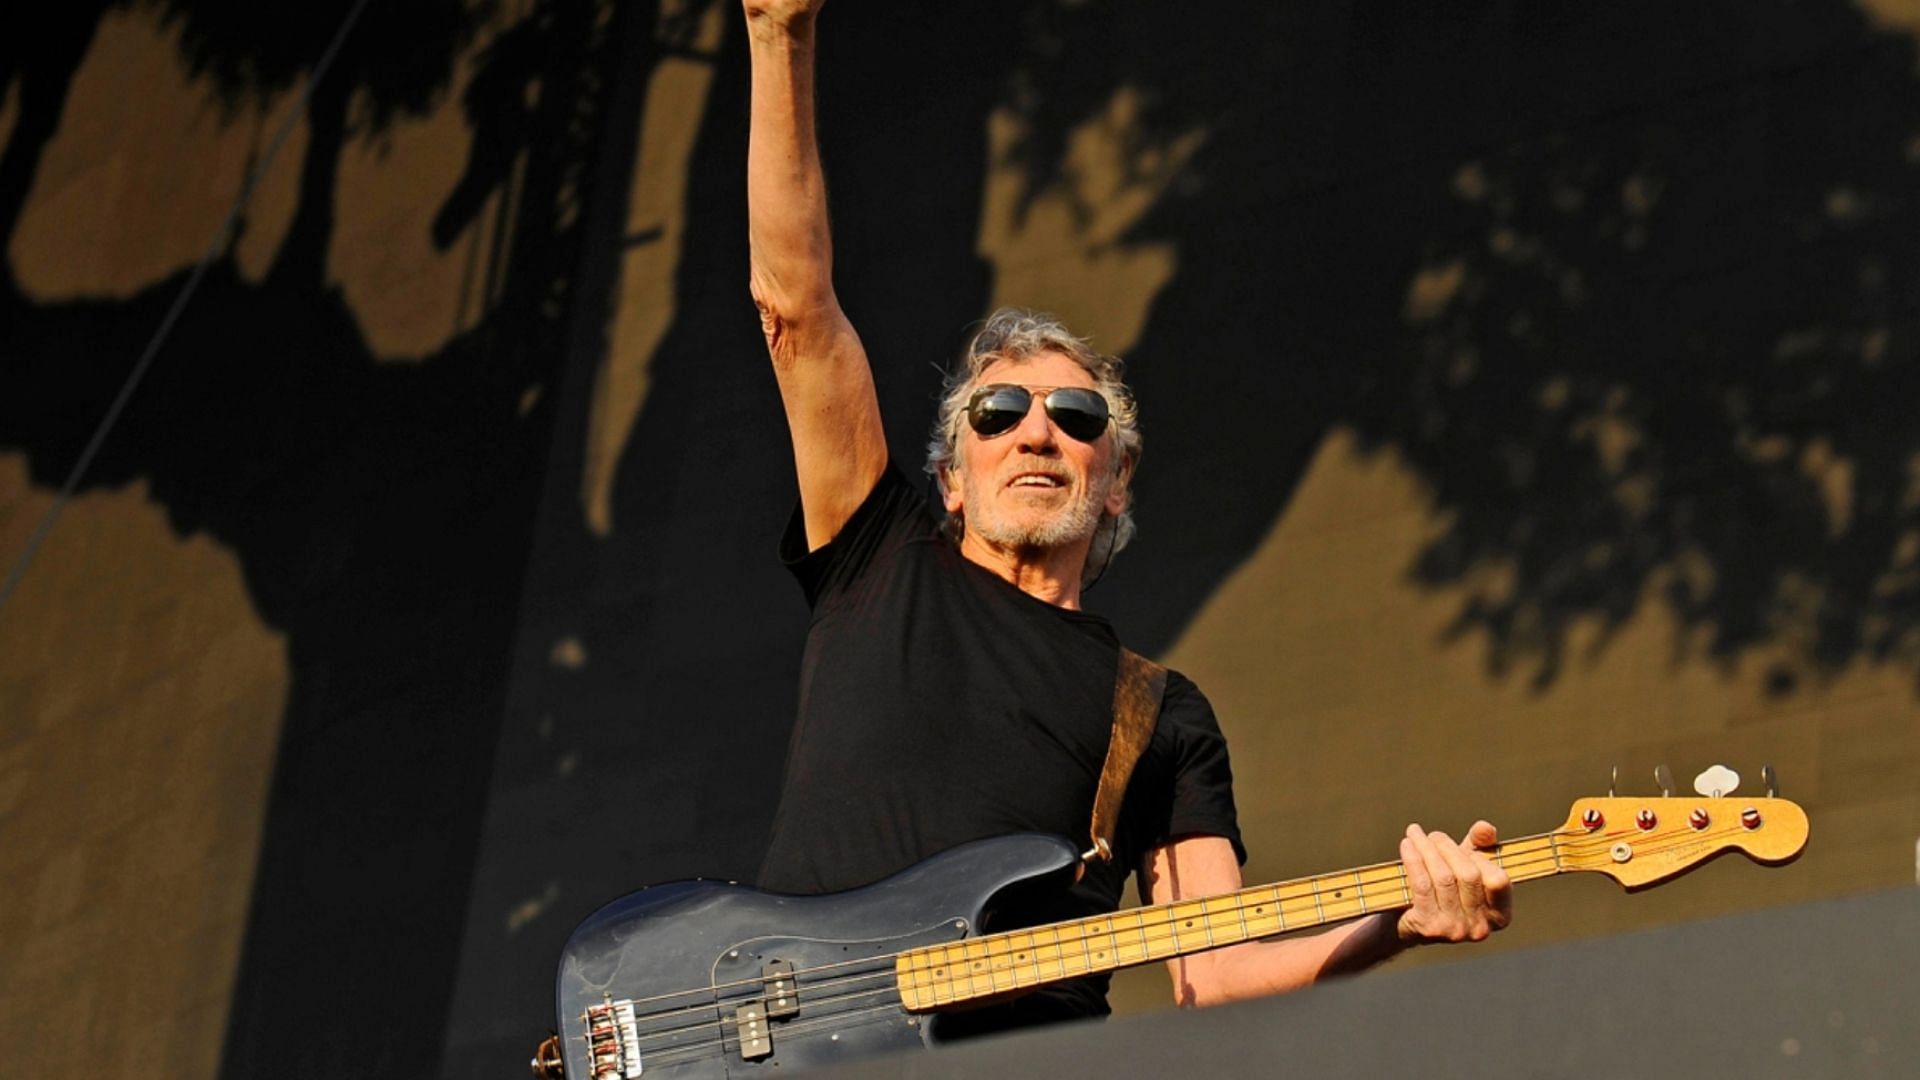 Roger Waters at a concert (Image via AP)